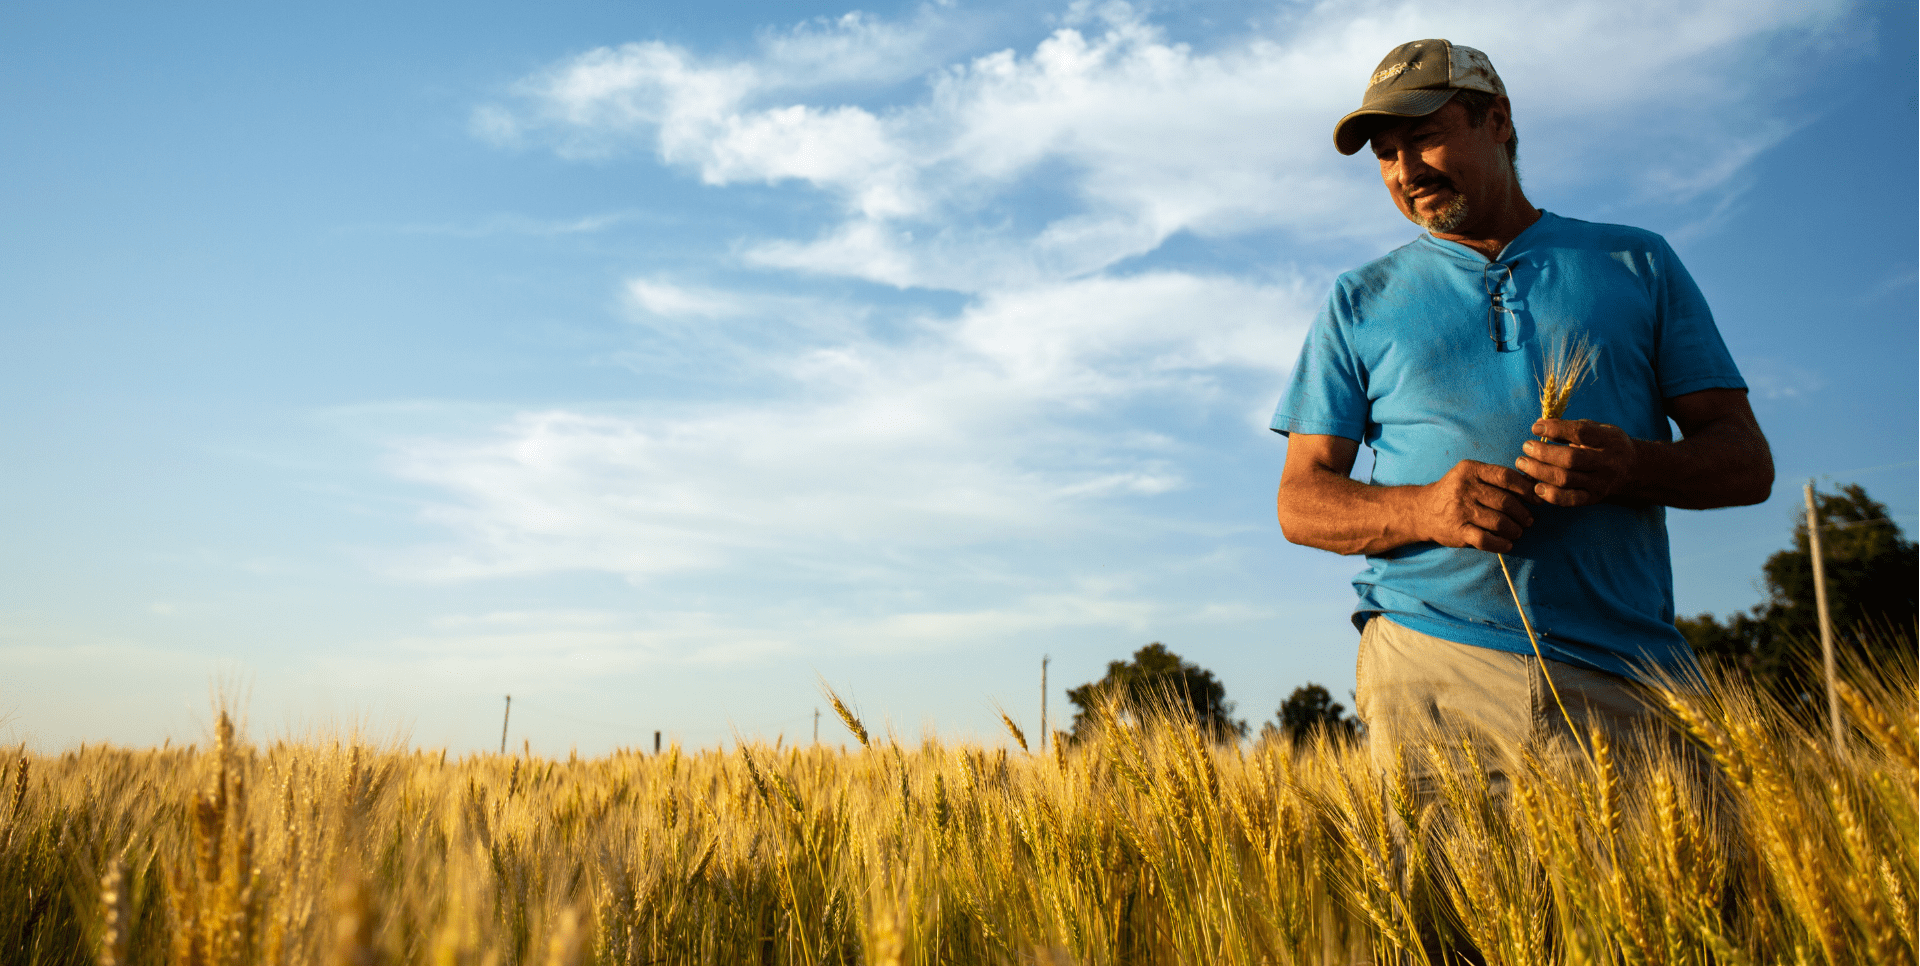 Image shows a farmer inspecting mature wheat in a field.